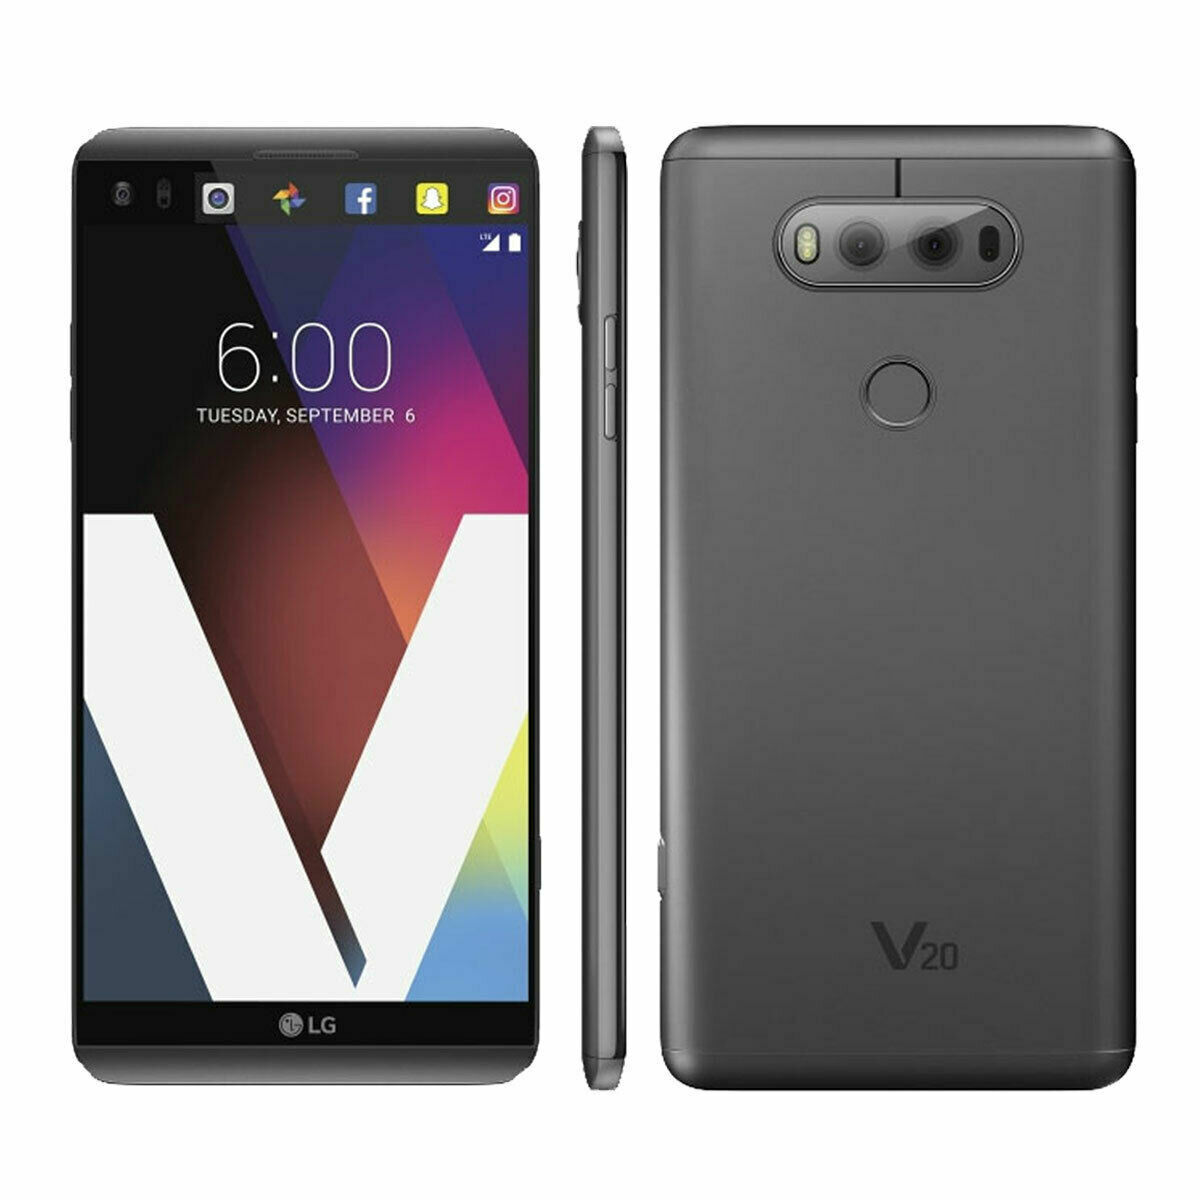 The Price of LG V20 H910 H918 VS995 LS997 US996 F800 Unlocked Smartphone- NEW SEALED IN BOX | LG Phone